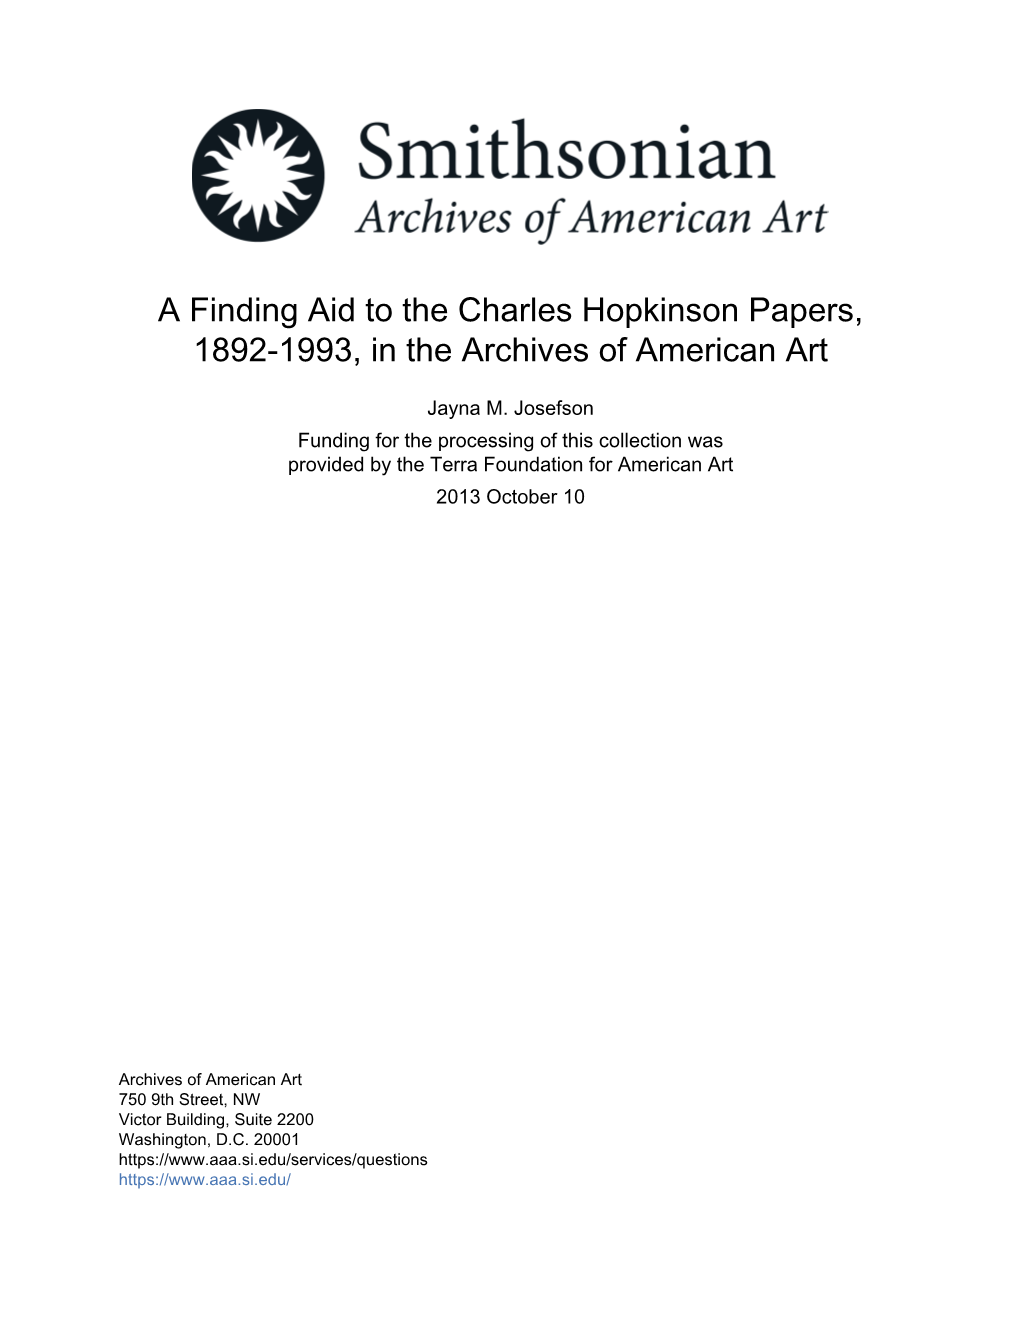 A Finding Aid to the Charles Hopkinson Papers, 1892-1993, in the Archives of American Art